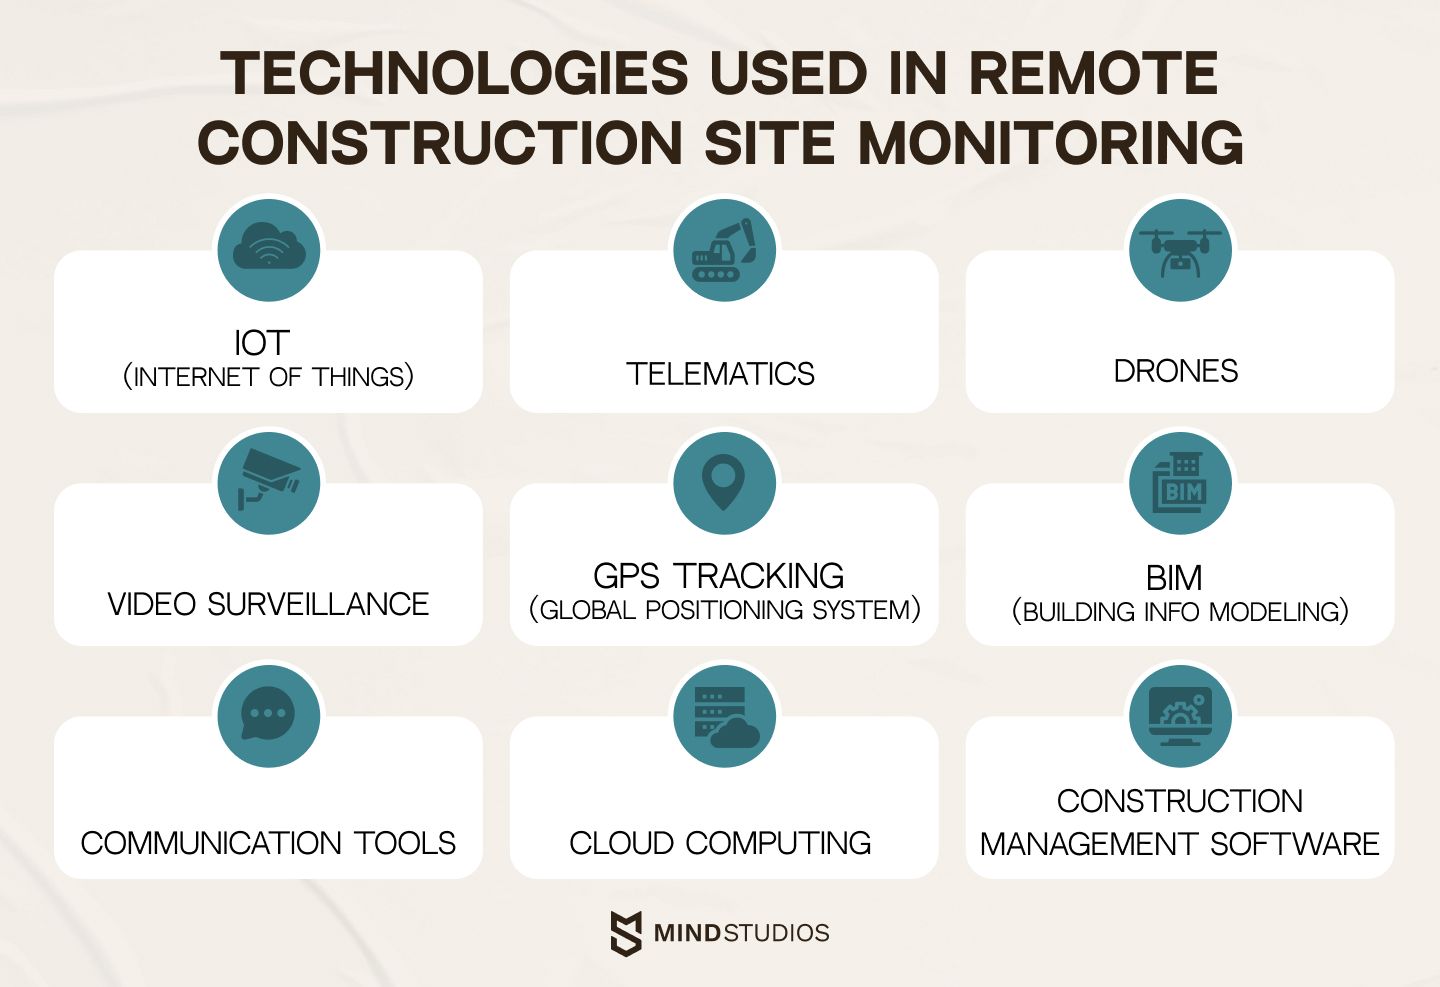 Key technologies for construction site monitoring